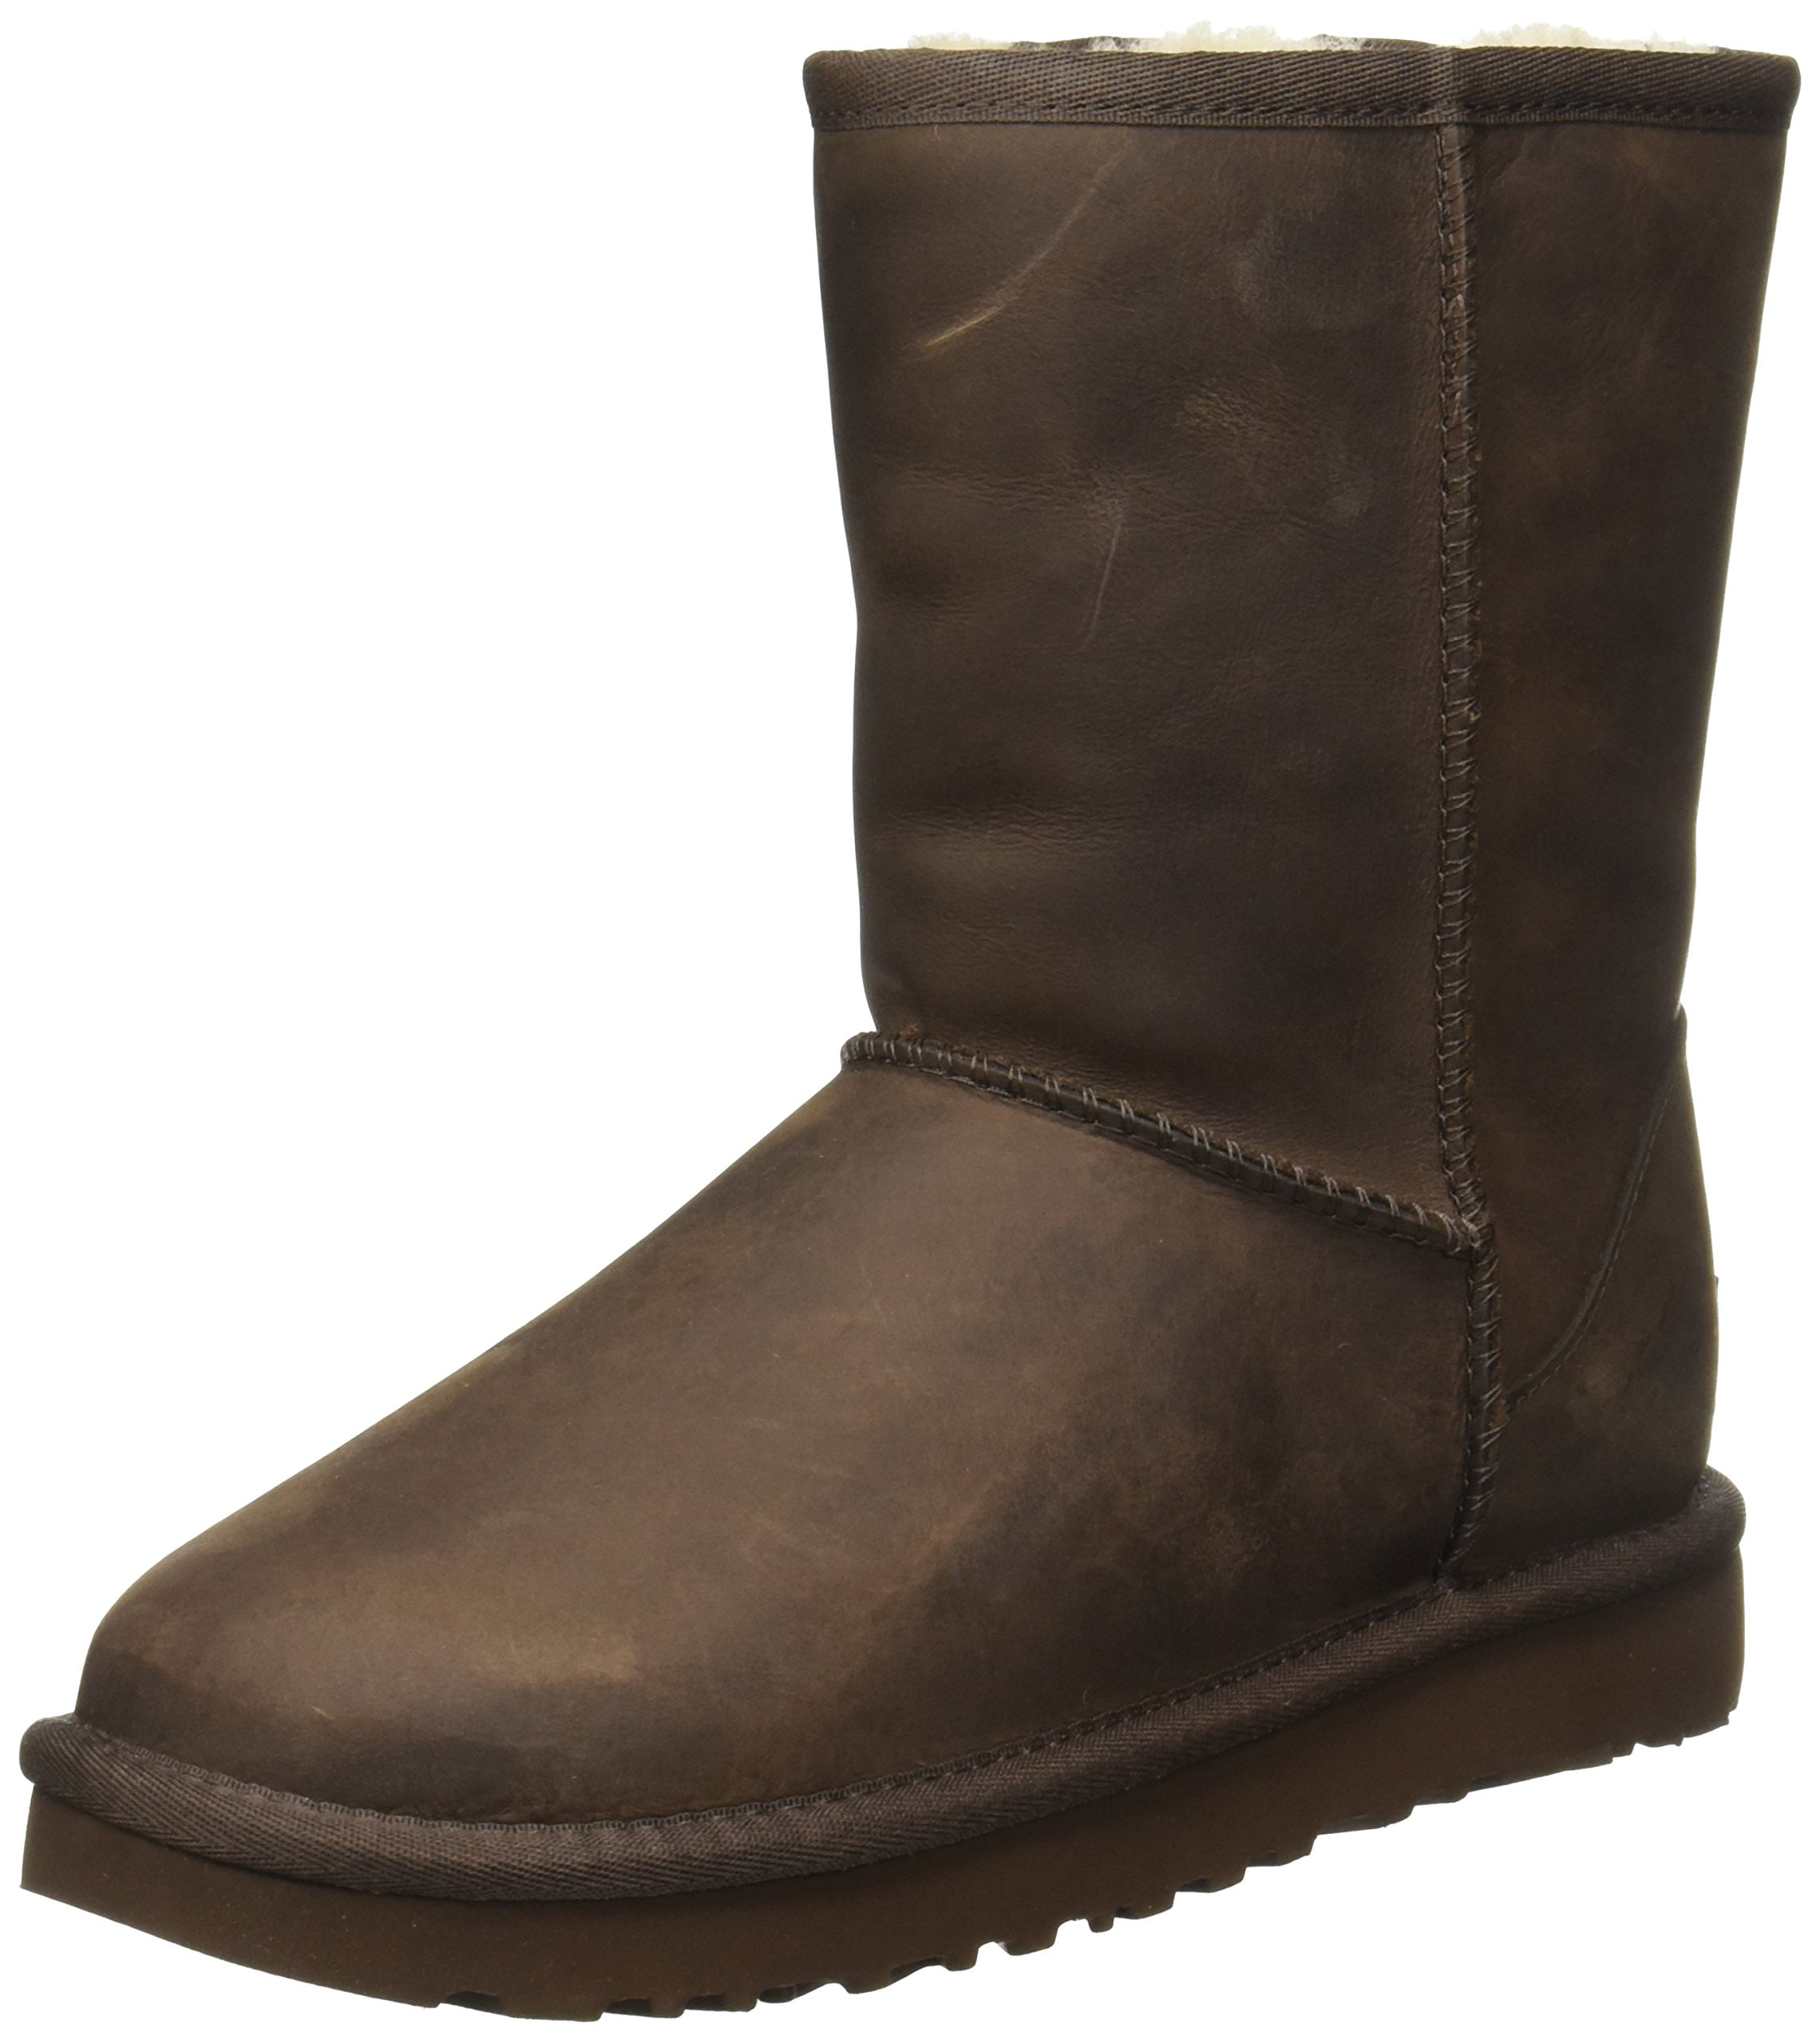 classic short leather boot